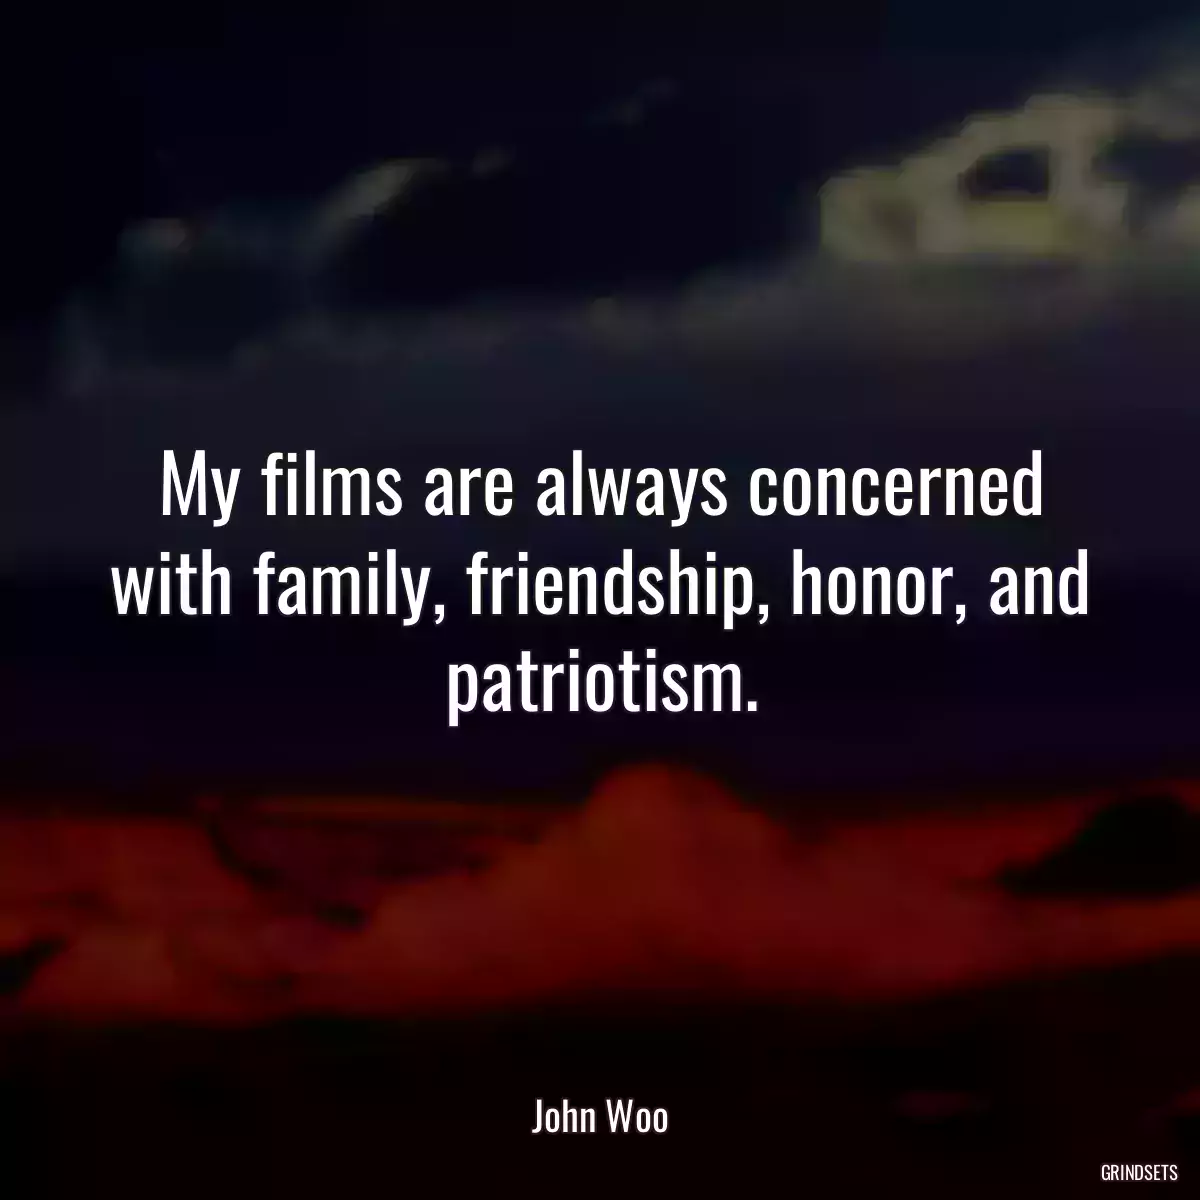 My films are always concerned with family, friendship, honor, and patriotism.